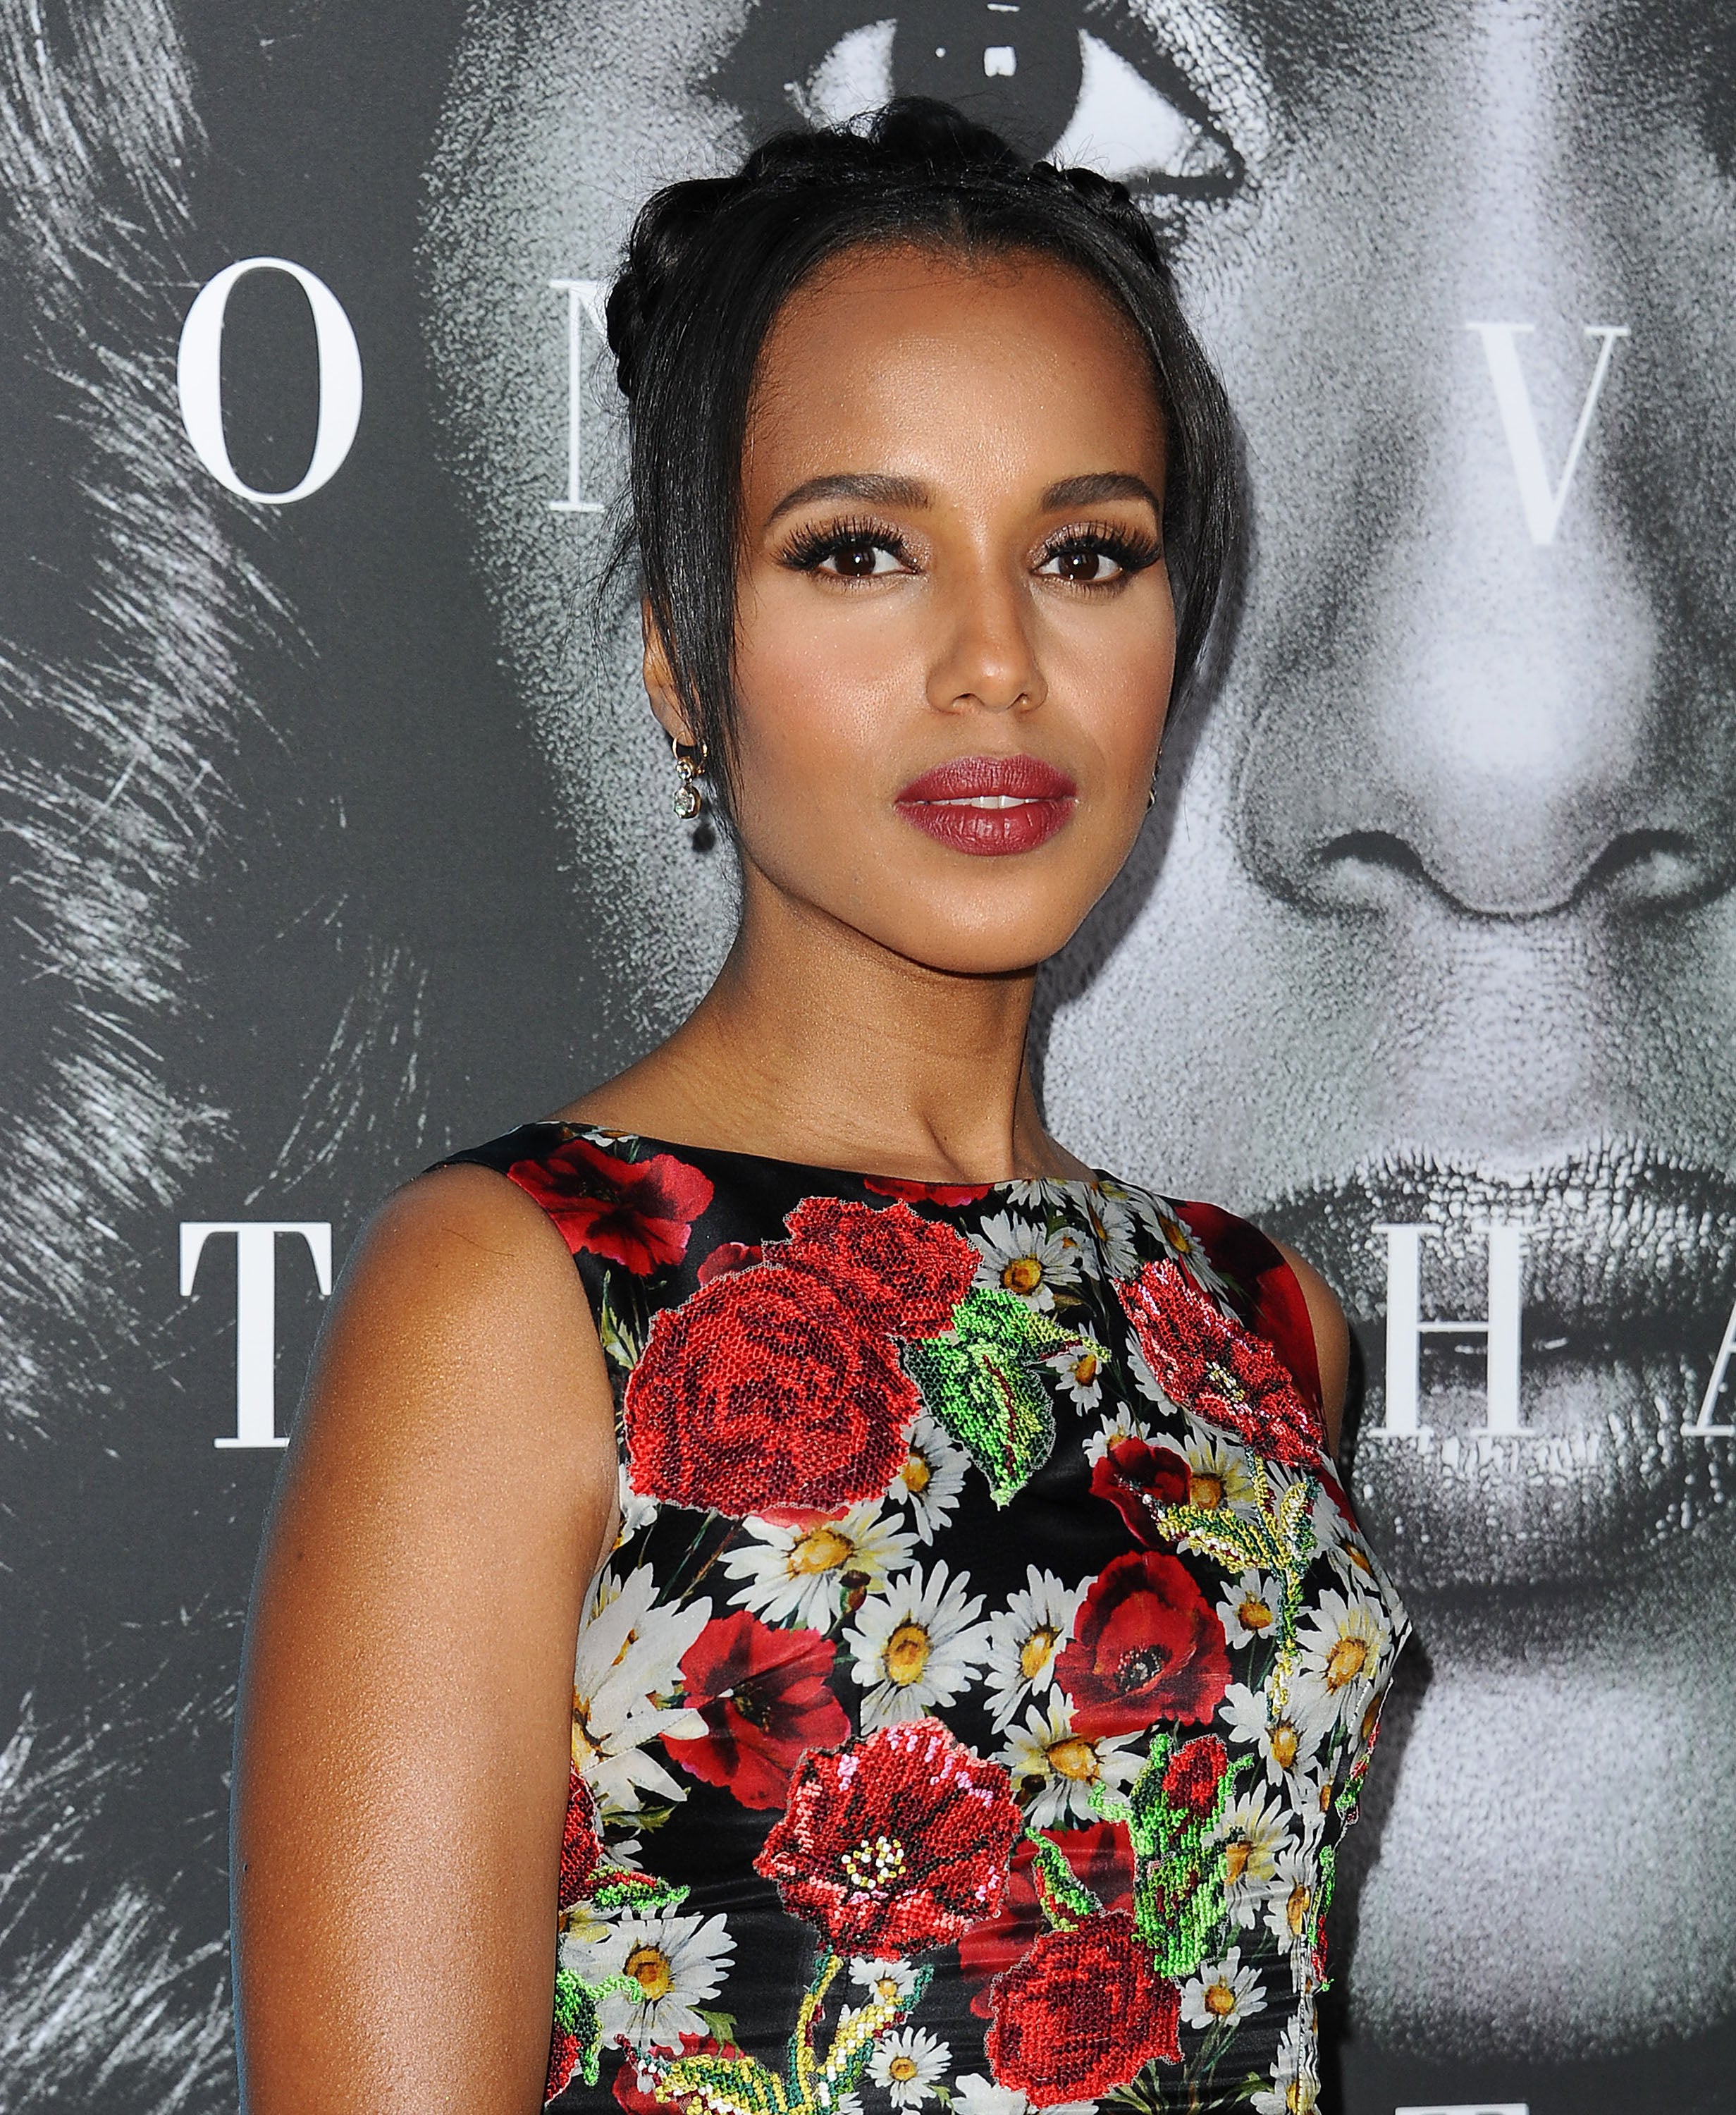 Kerry Washington Was Once Fired For Not Being "Hood" Enough
